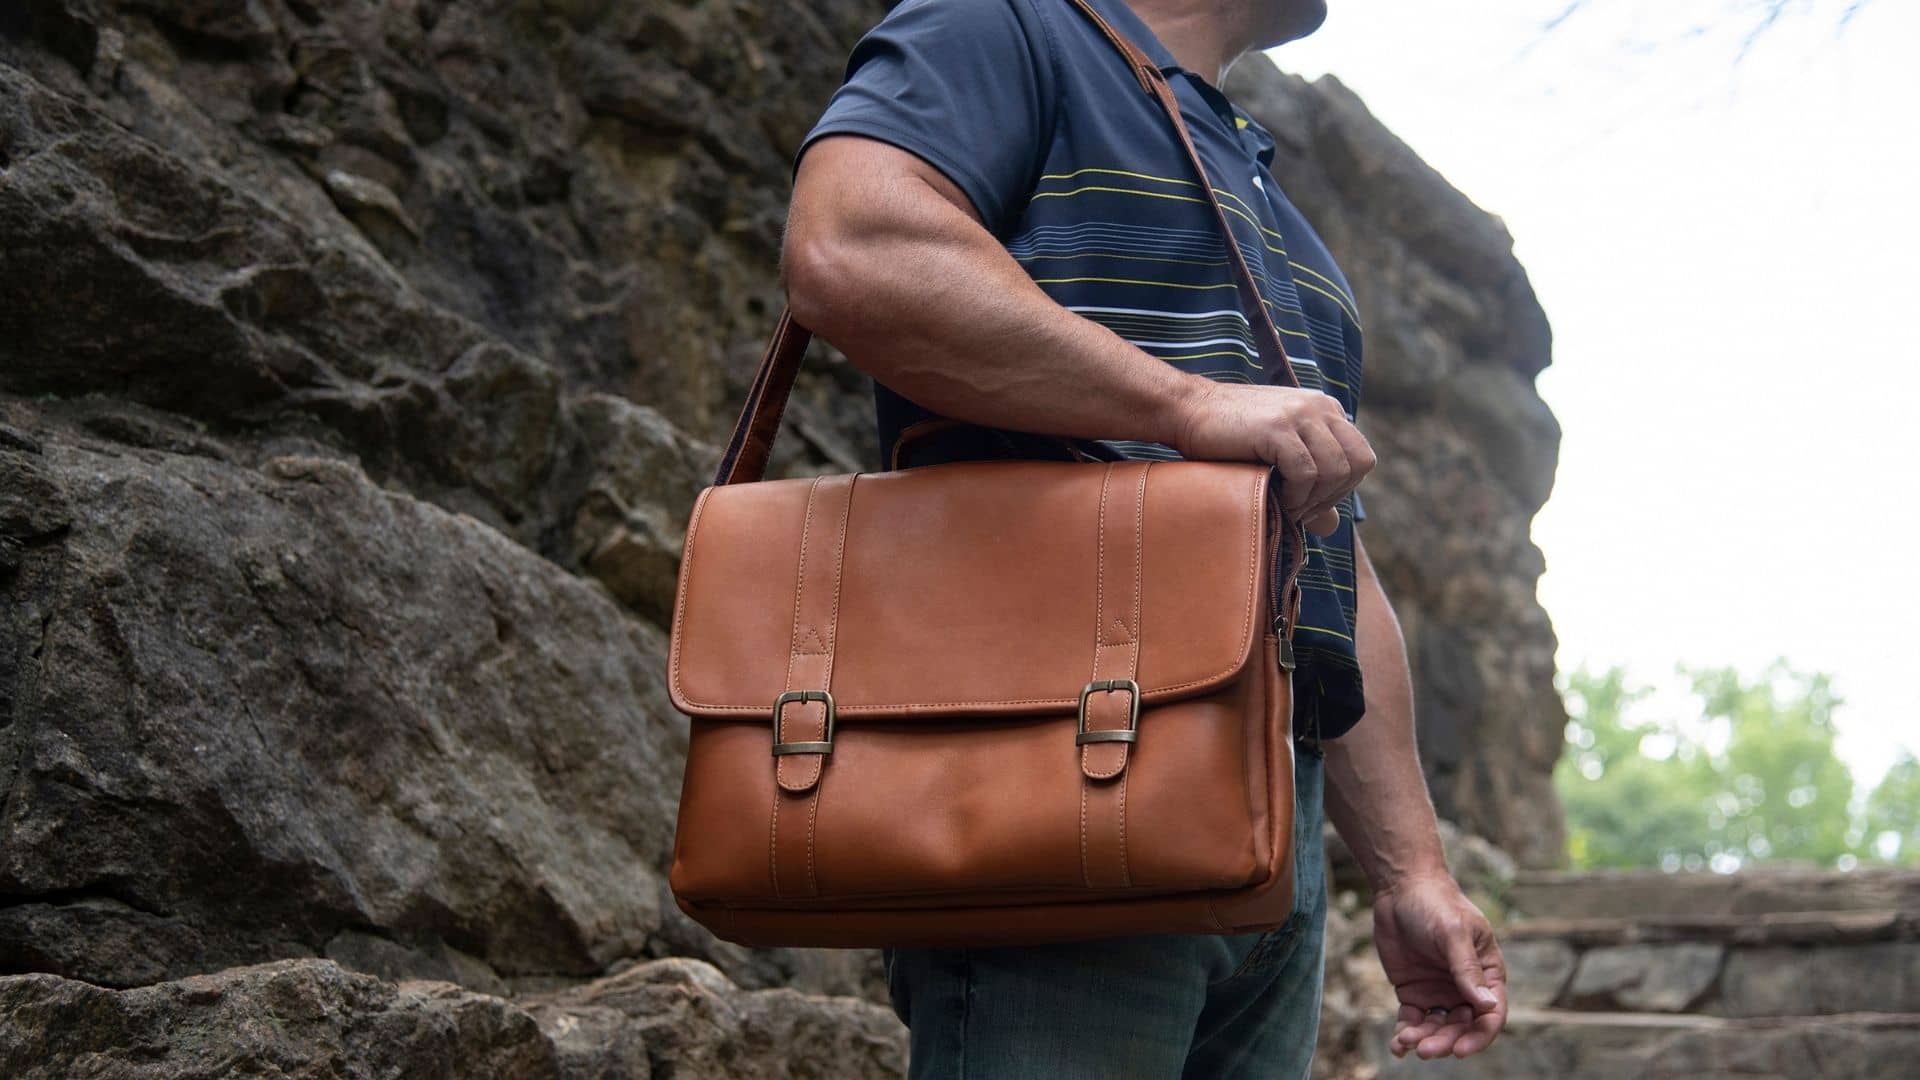 Leather briefcases make good gifts for men